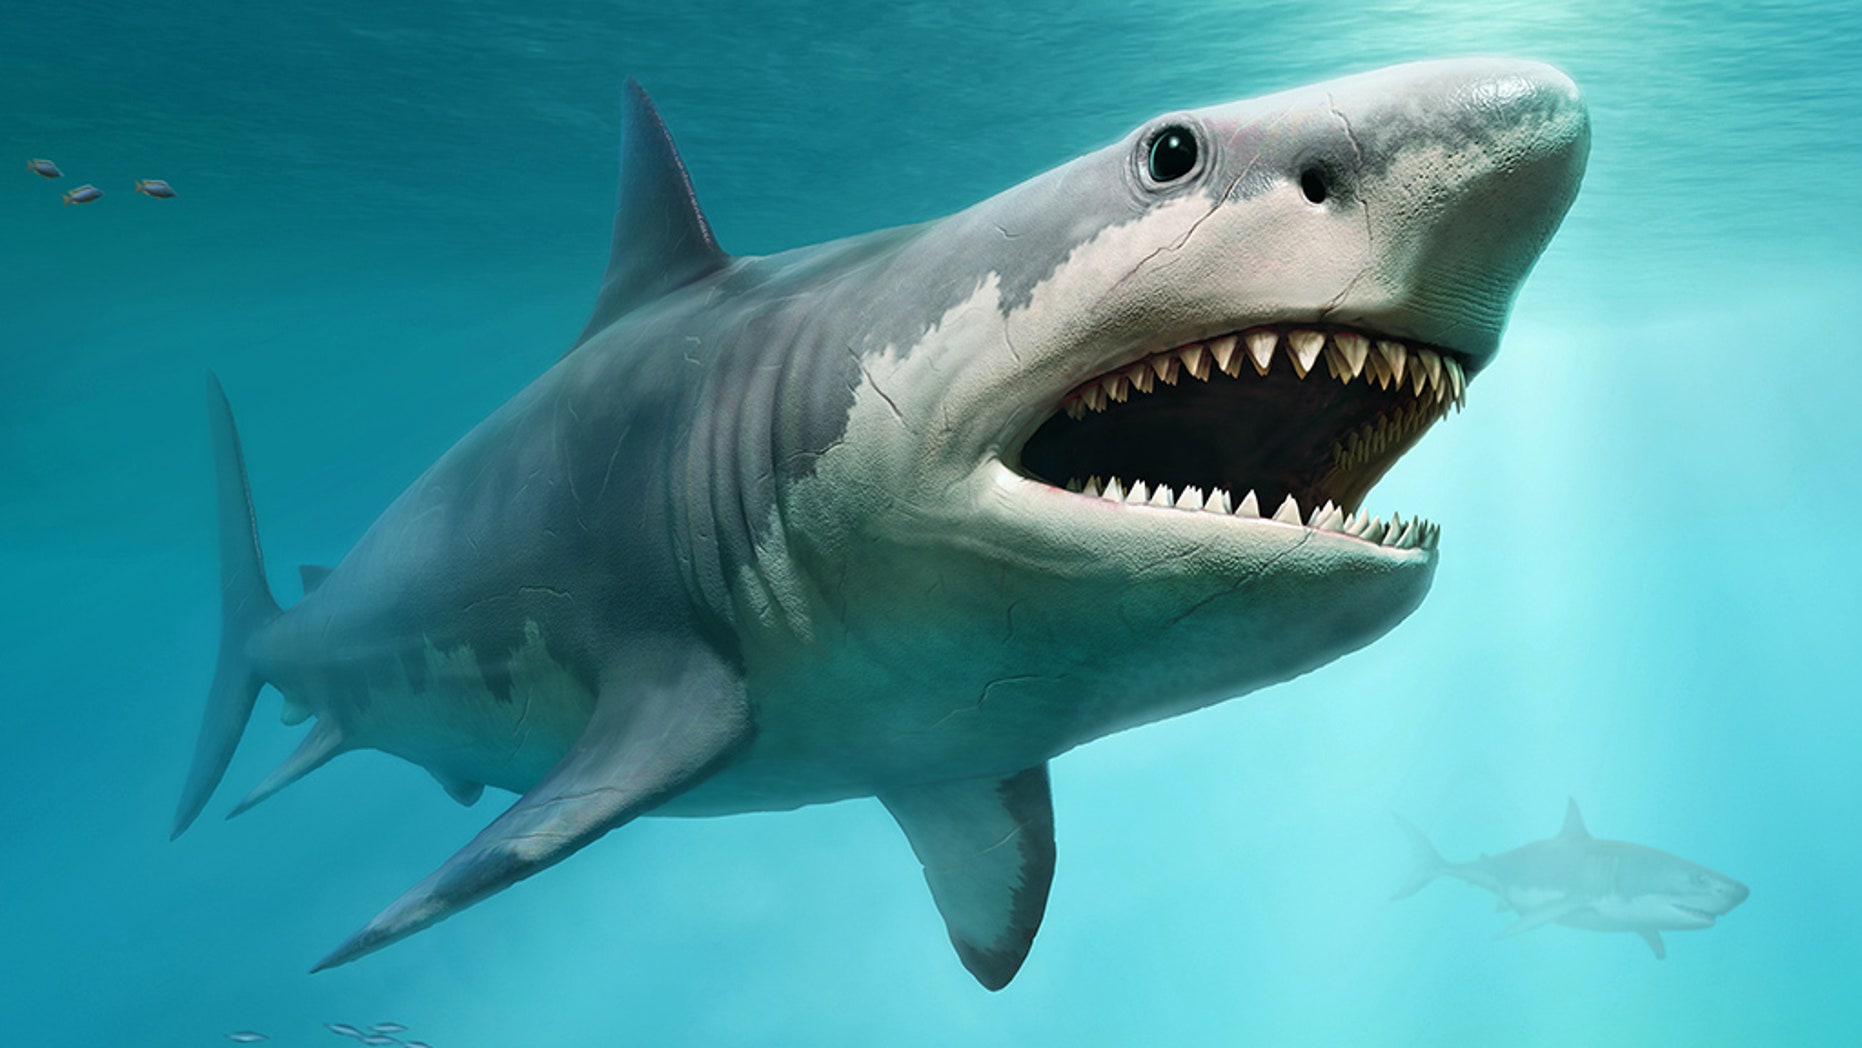 Megalodon may have gone extinct for this shocking reason | Fox News